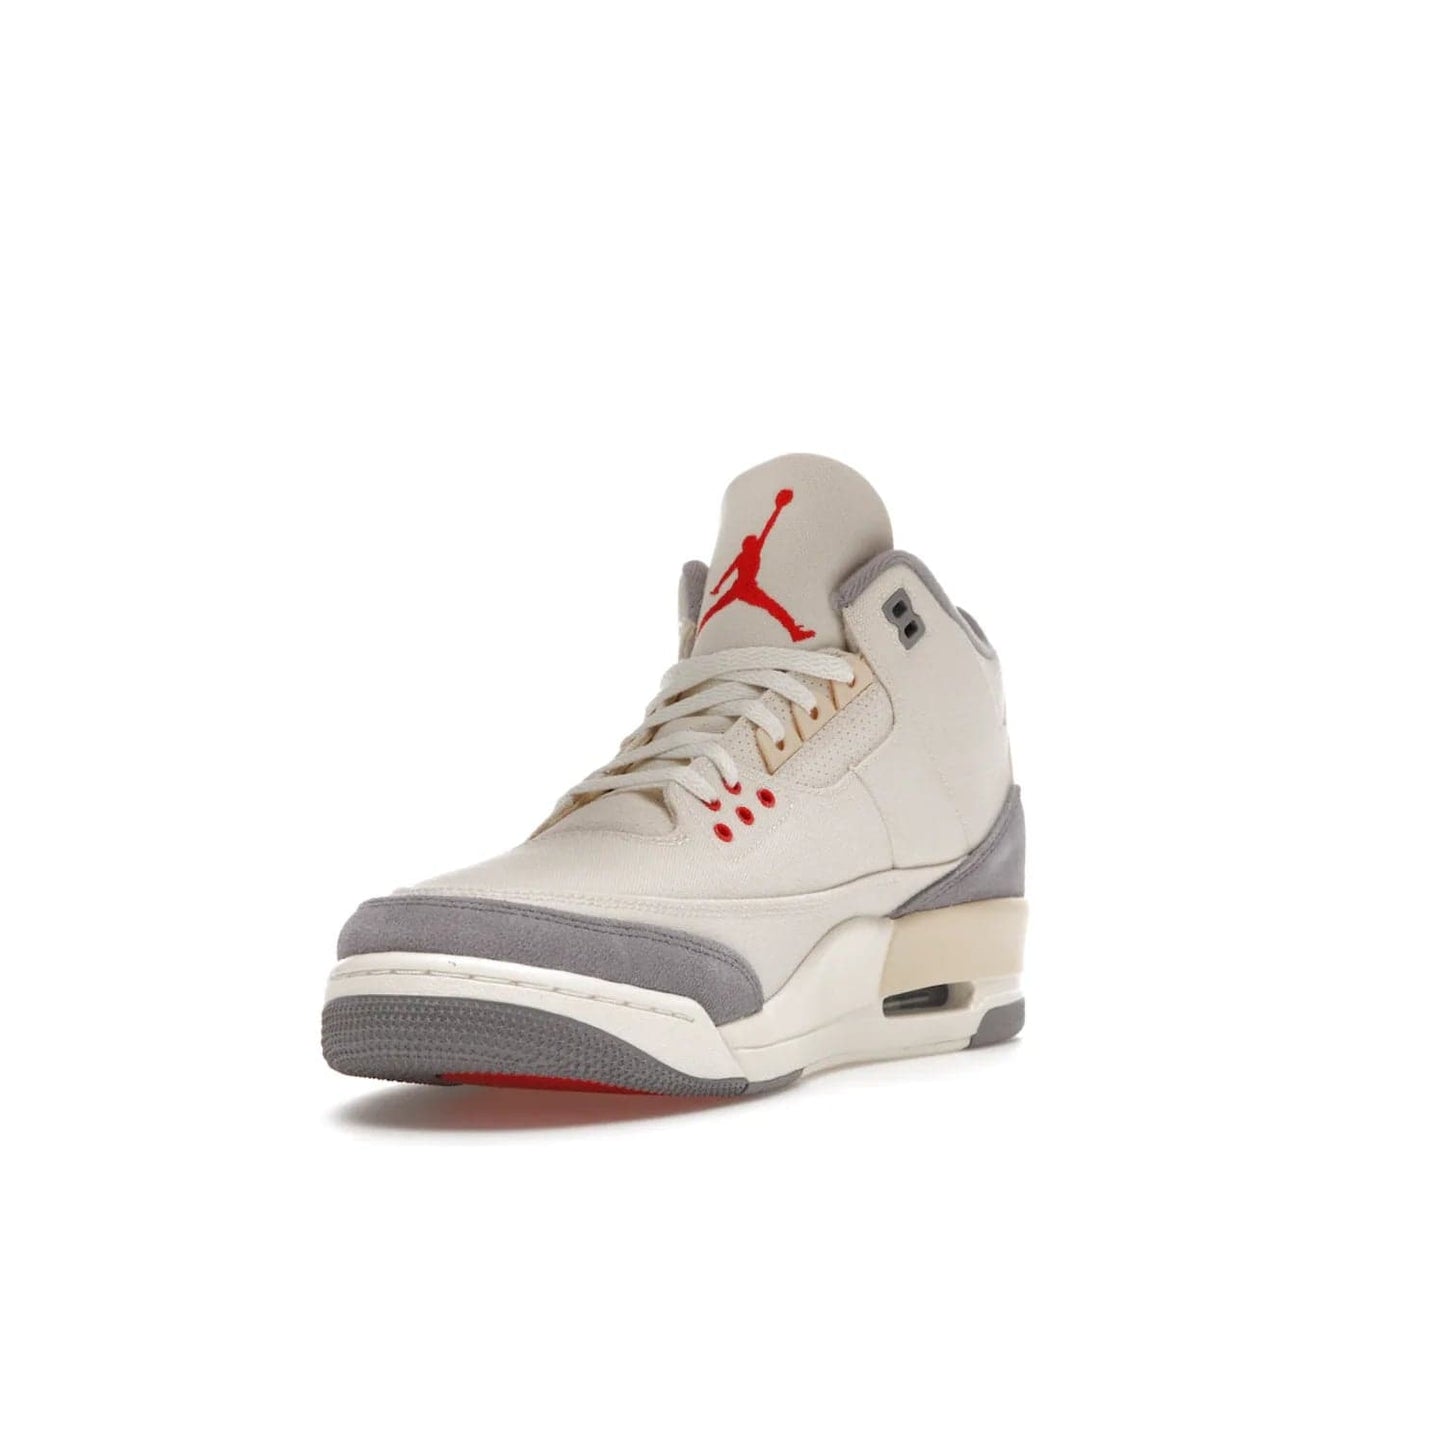 Jordan 3 Retro Muslin - Image 13 - Only at www.BallersClubKickz.com - Eye-catching Air Jordan 3 Retro Muslin in a neutral palette of grey, cream, and red. Featuring canvas upper, suede overlays and white/grey Air Max sole. Available in March 2022.